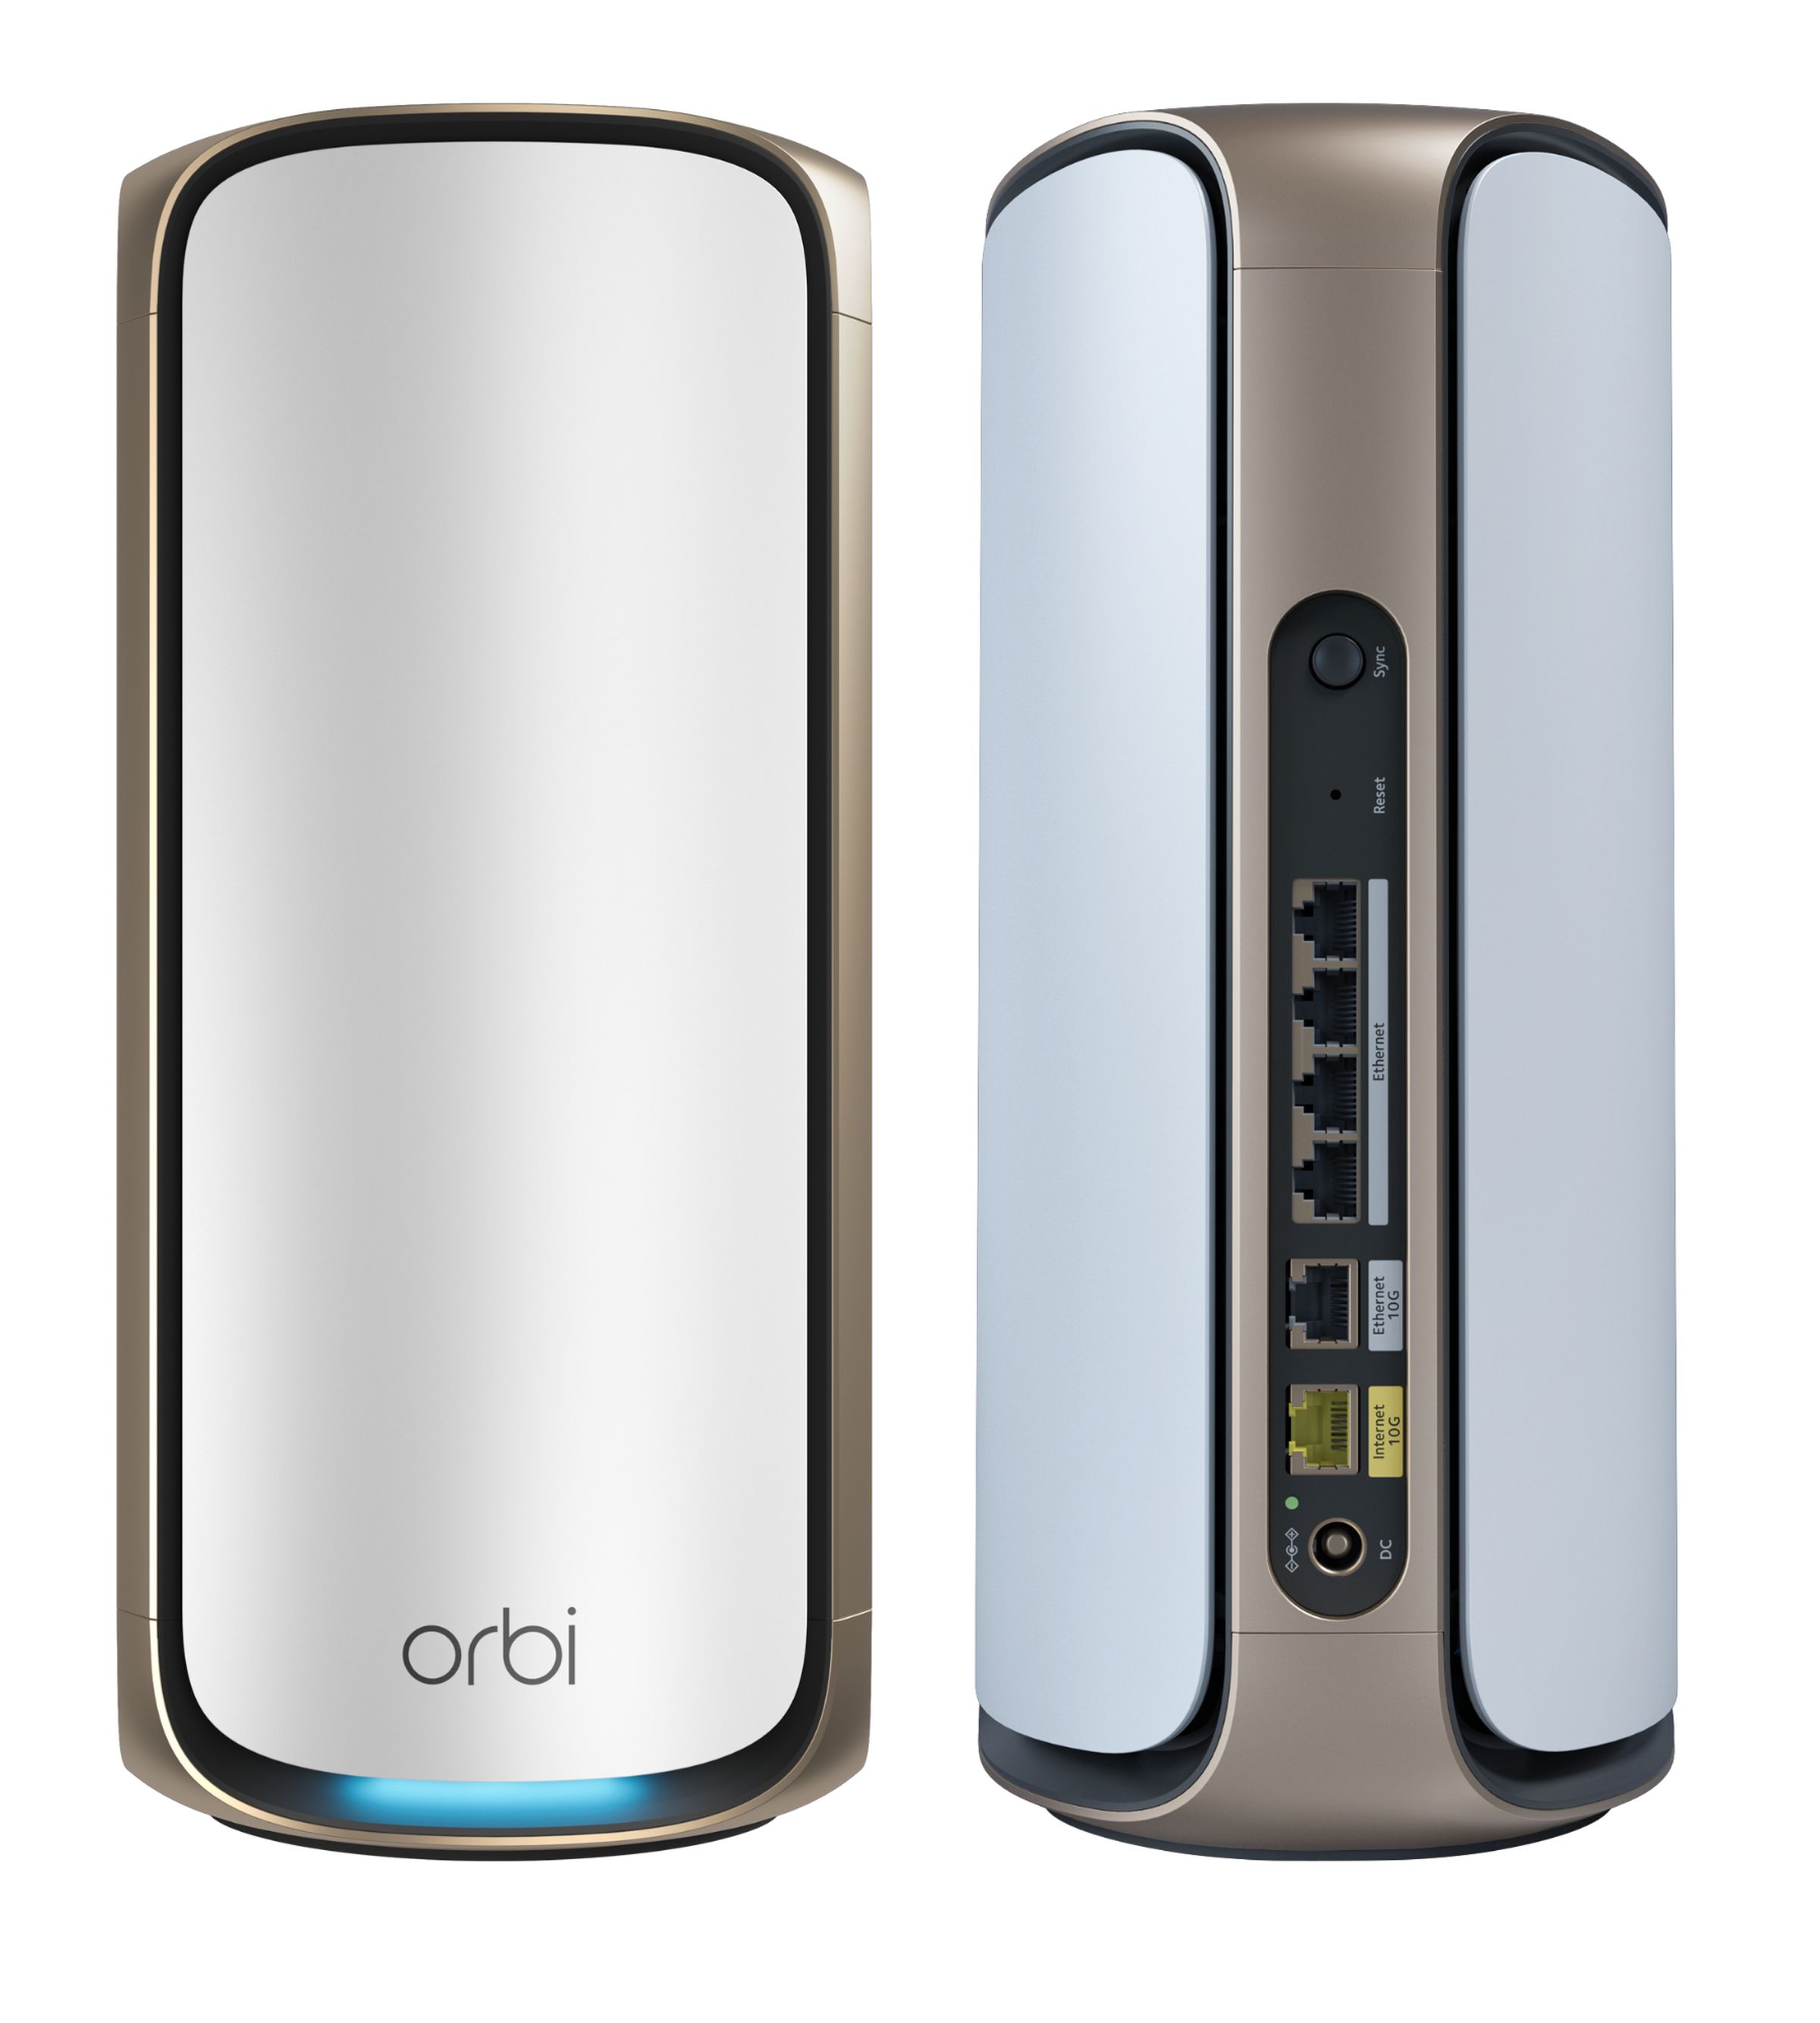 The Netgear Orbi 970 mesh system as seen from the front and rear.